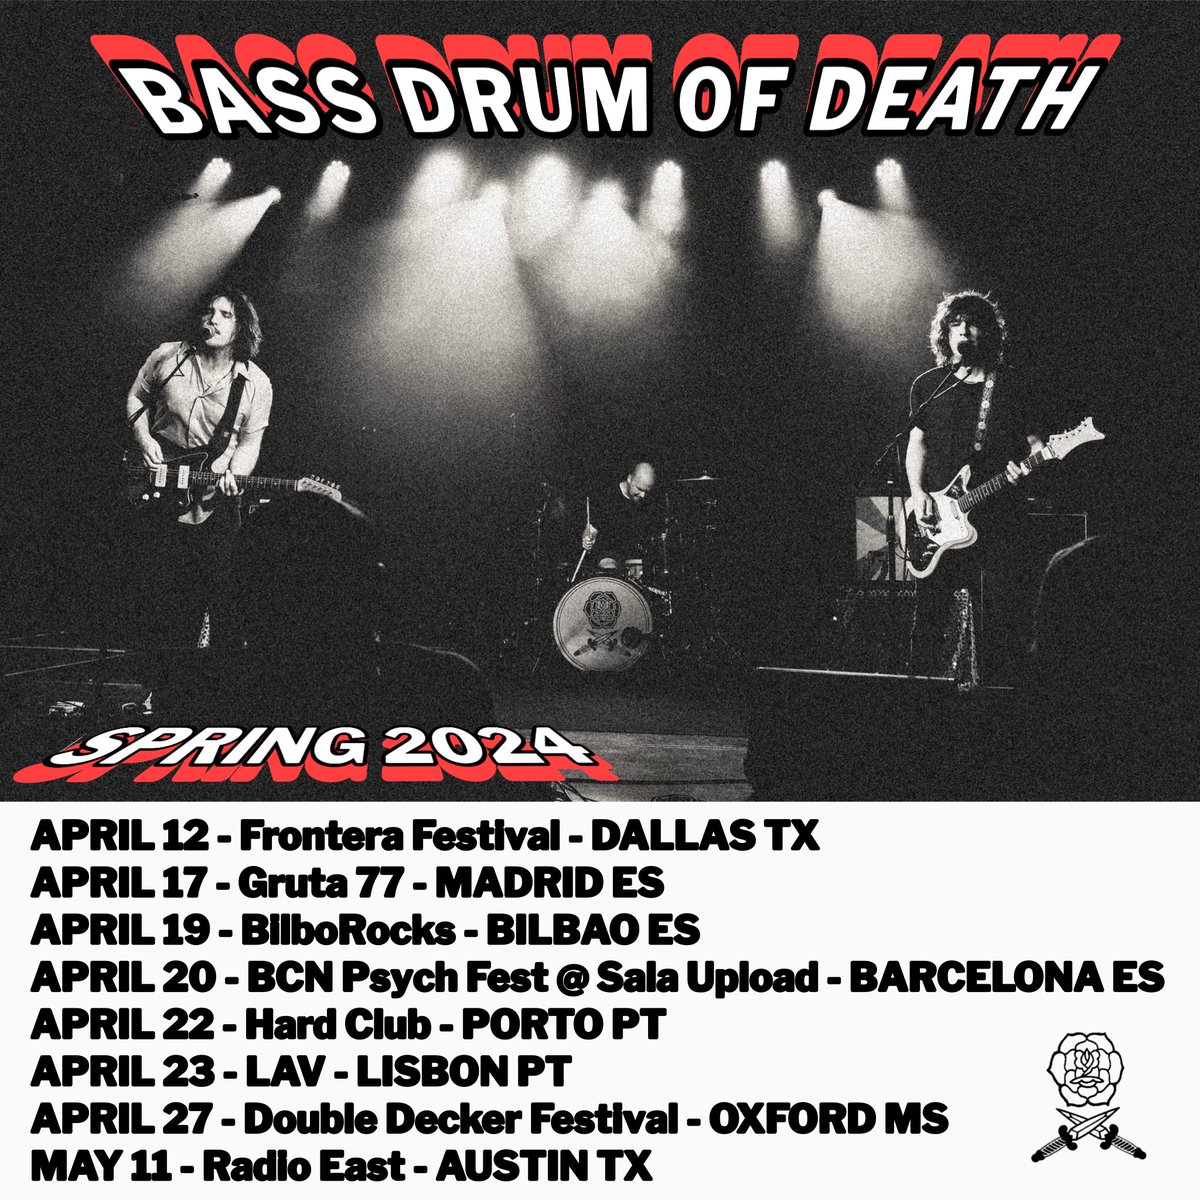 Texas! Spain! Portugal! Missippi! Texas again! Spring shows start this week, baby. Tix are at bassdrumofdeath.com !